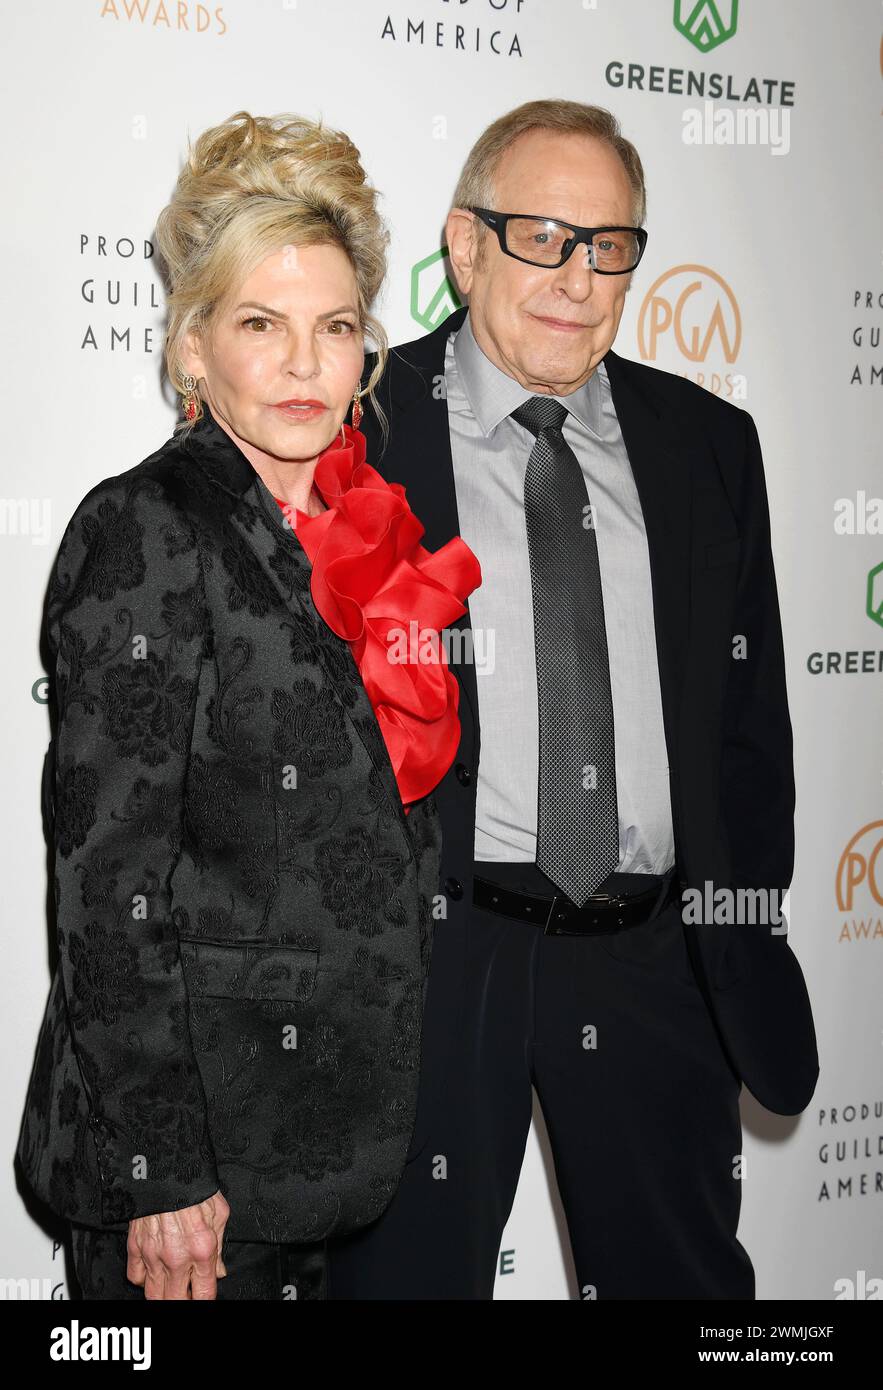 Hollywood, California, USA. 25th Feb, 2024. (L-R) Stephanie Haymes Roven and Charles Roven attend the 35th Annual Producers Guild Awards at The Ray Dolby Ballroom on February 25, 2024 in Hollywood, California. Credit: Jeffrey Mayer/Jtm Photos/Media Punch/Alamy Live News Stock Photo